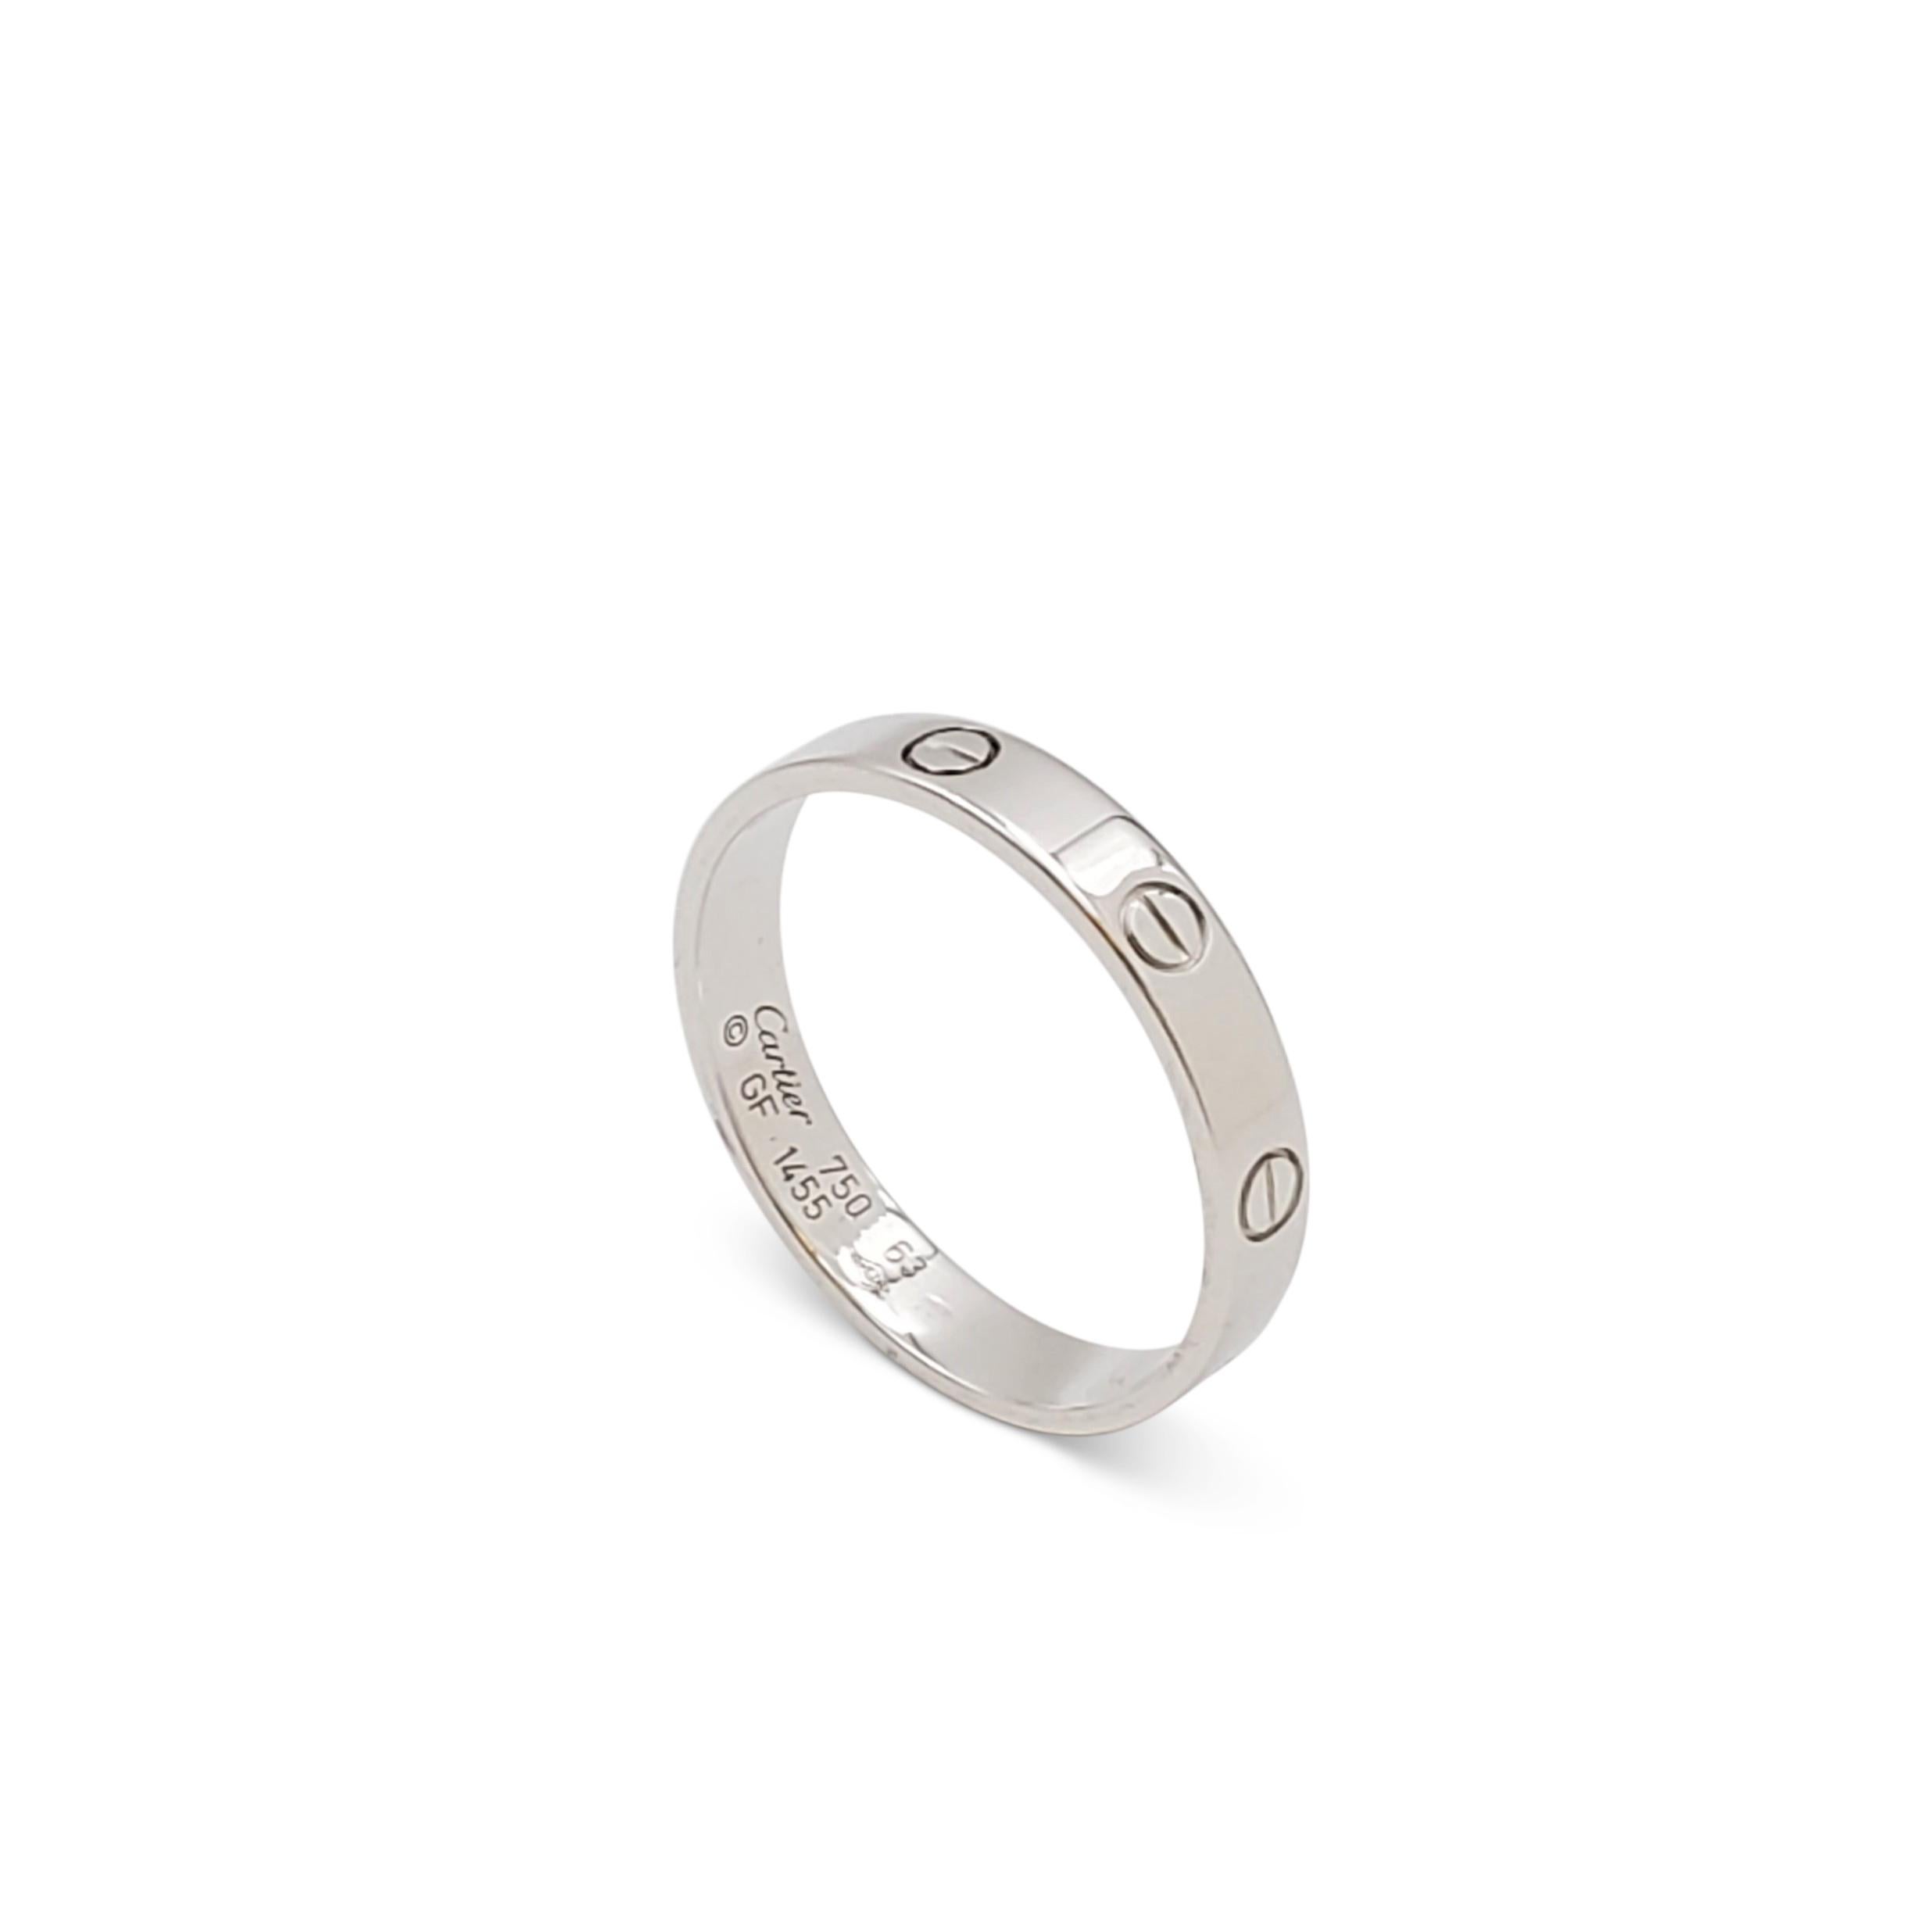 Authentic Cartier 'Love' wedding band crafted in 18 karat white gold. Signed Cartier, 750, with serial number. Ring size 63 (US 10 1/4). The ring is presented with the original box, no papers. CIRCA 2010s.

Brand: Cartier
Collection: Love
Metal: 18